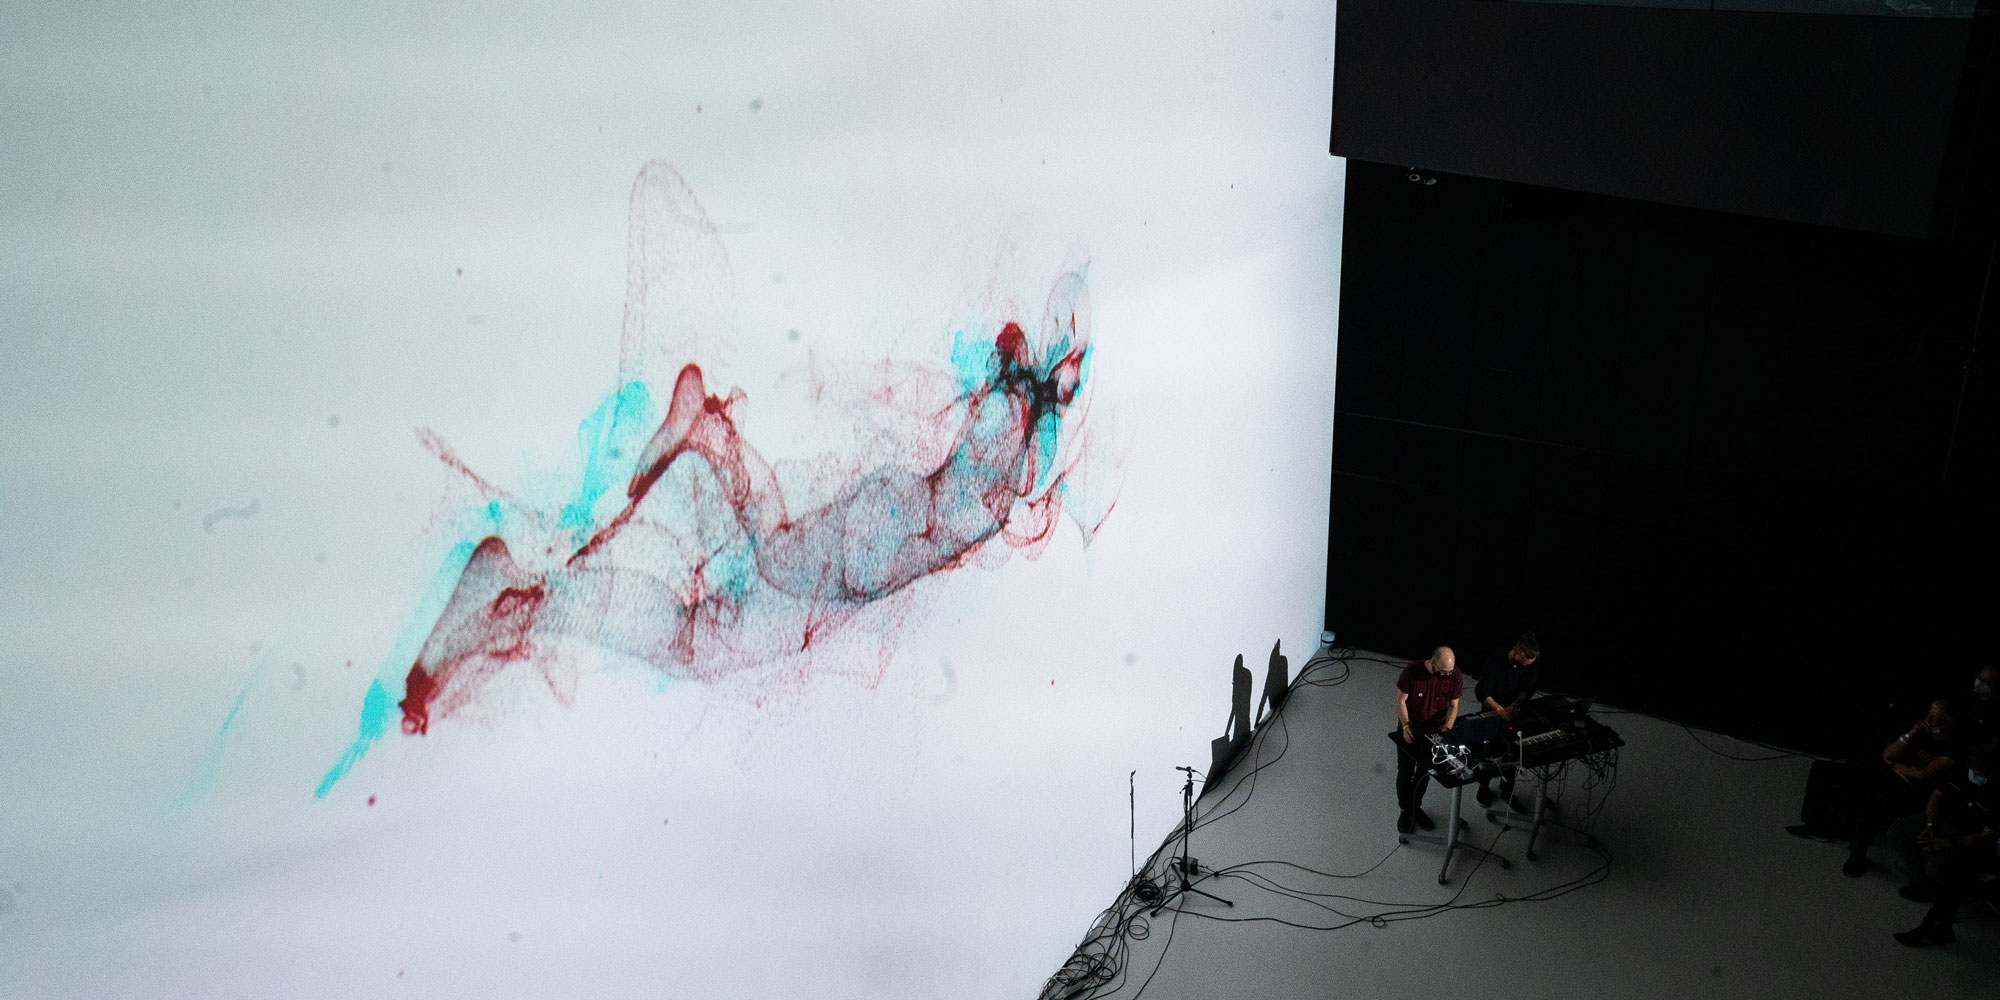 The audiovisual performance [ˈdaːzaɪn] by the artist duo Sective is an abstract narrative of a disembodied figure in virtual space and its return to the natural state of physical reality